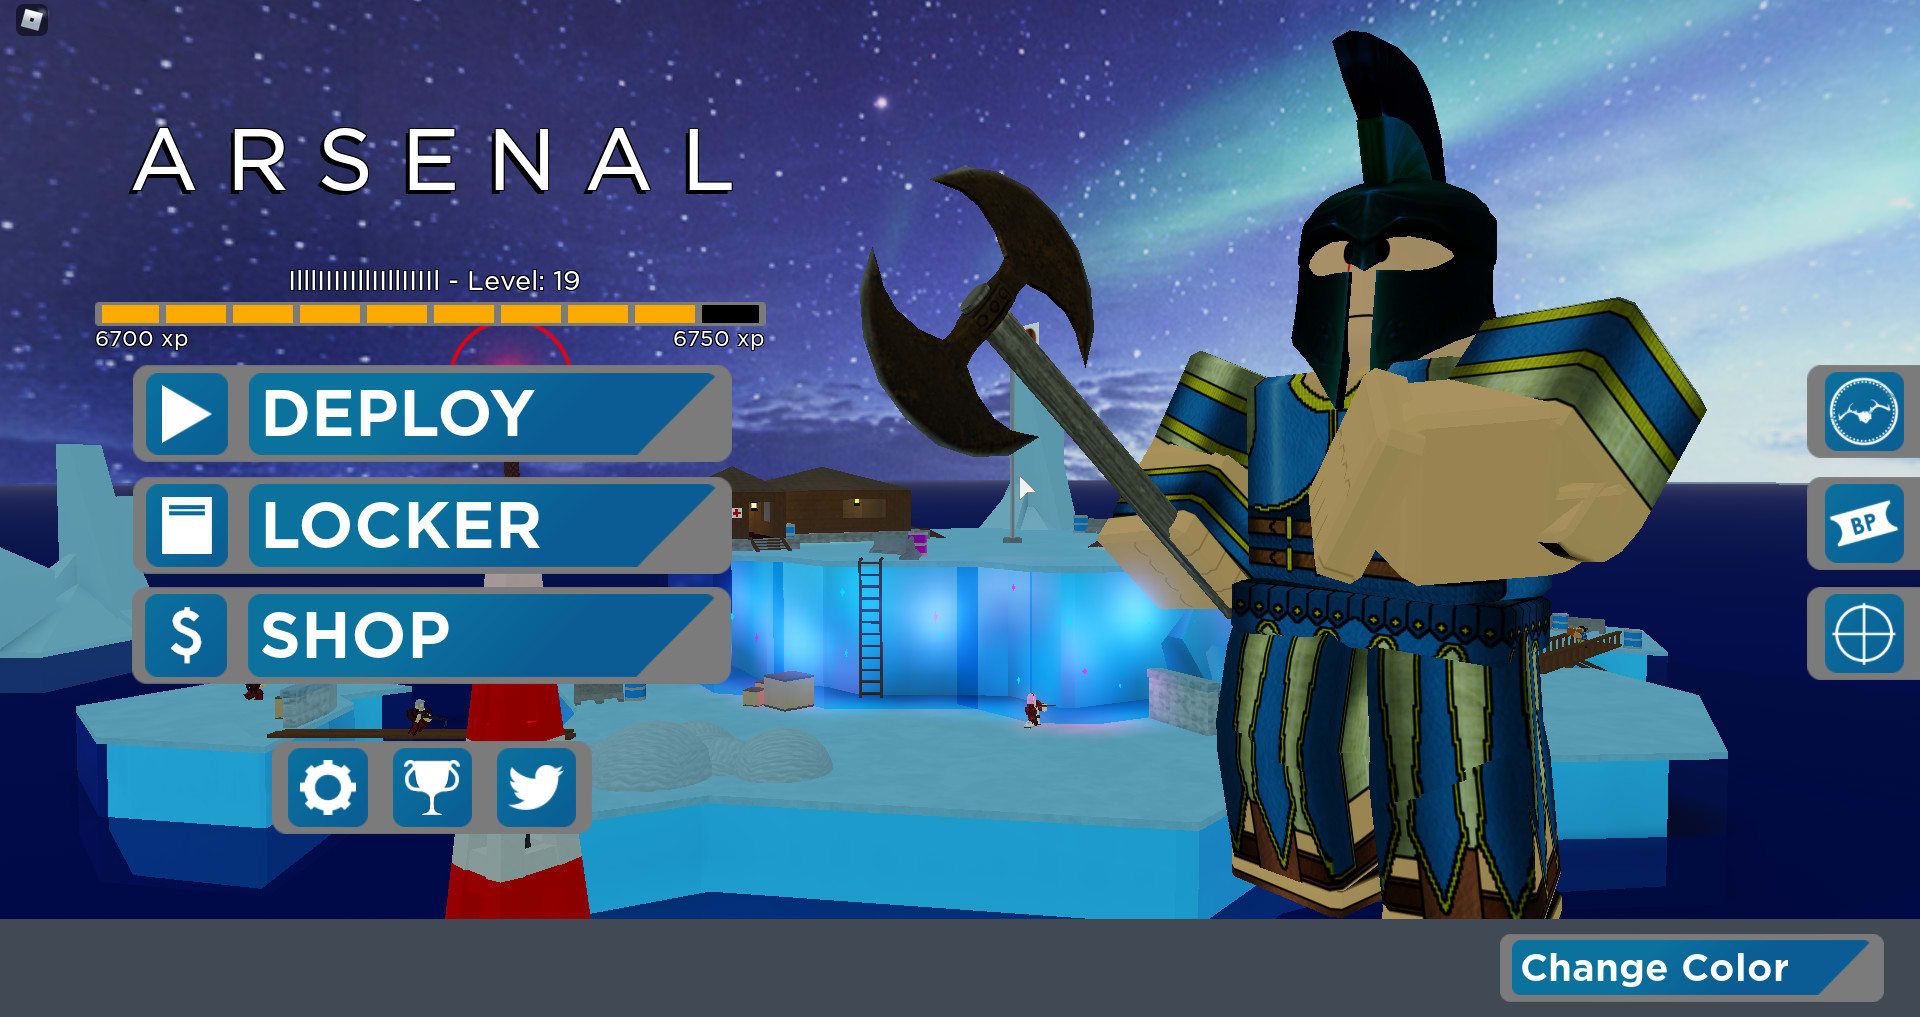 Boost Your Roblox Arsenal Account By Smilodon Gaming Fiverr - how to get better at arsenal roblox pc